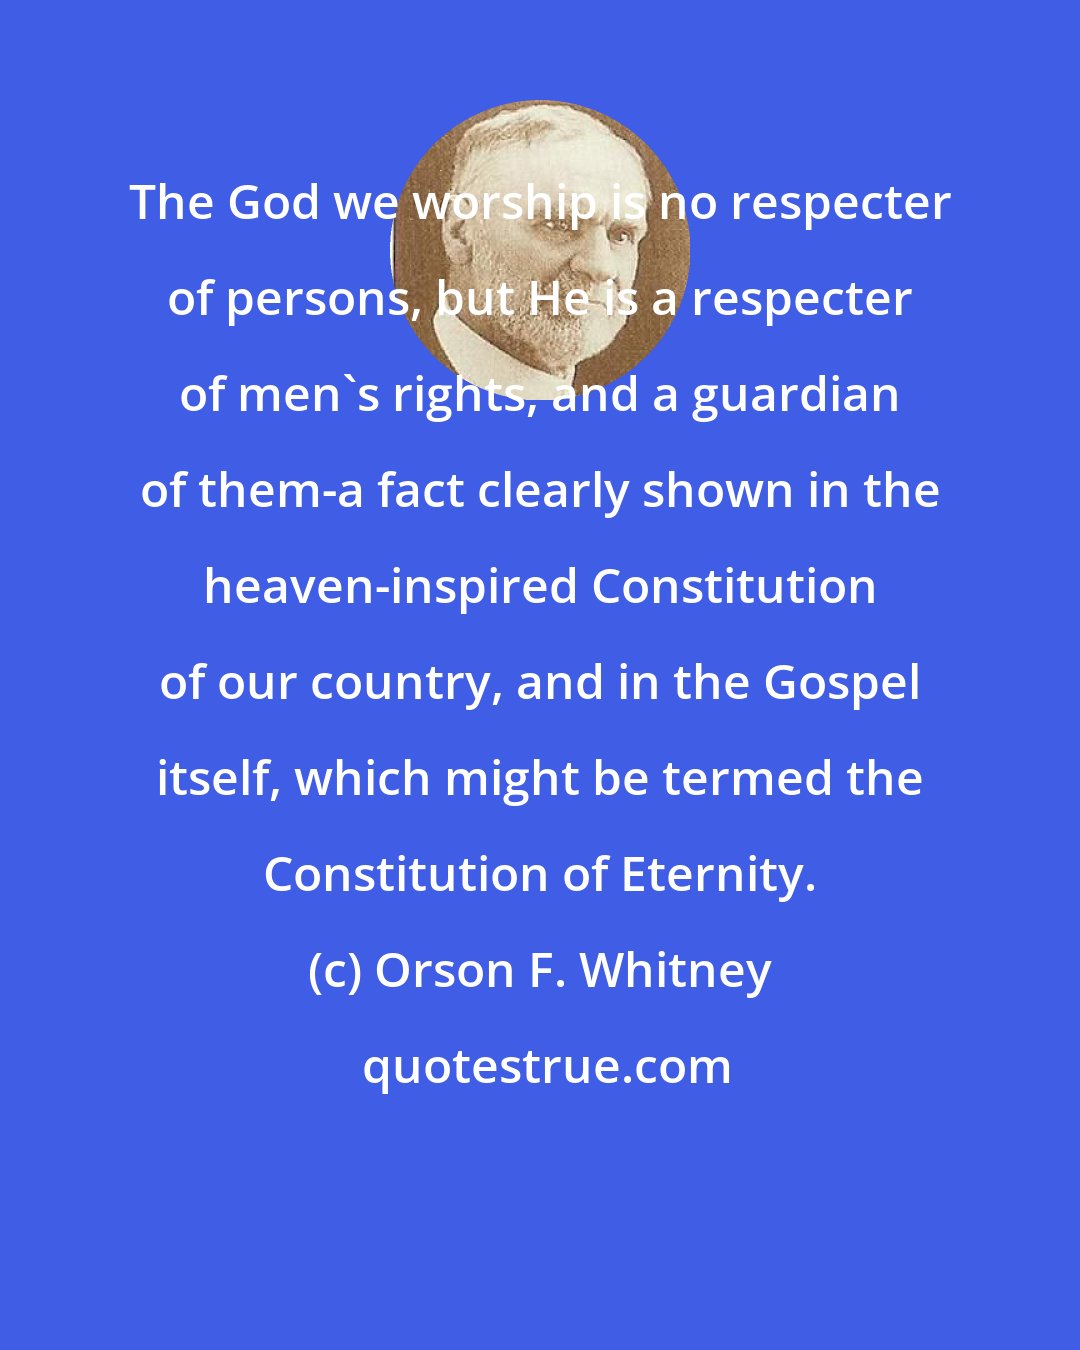 Orson F. Whitney: The God we worship is no respecter of persons, but He is a respecter of men's rights, and a guardian of them-a fact clearly shown in the heaven-inspired Constitution of our country, and in the Gospel itself, which might be termed the Constitution of Eternity.